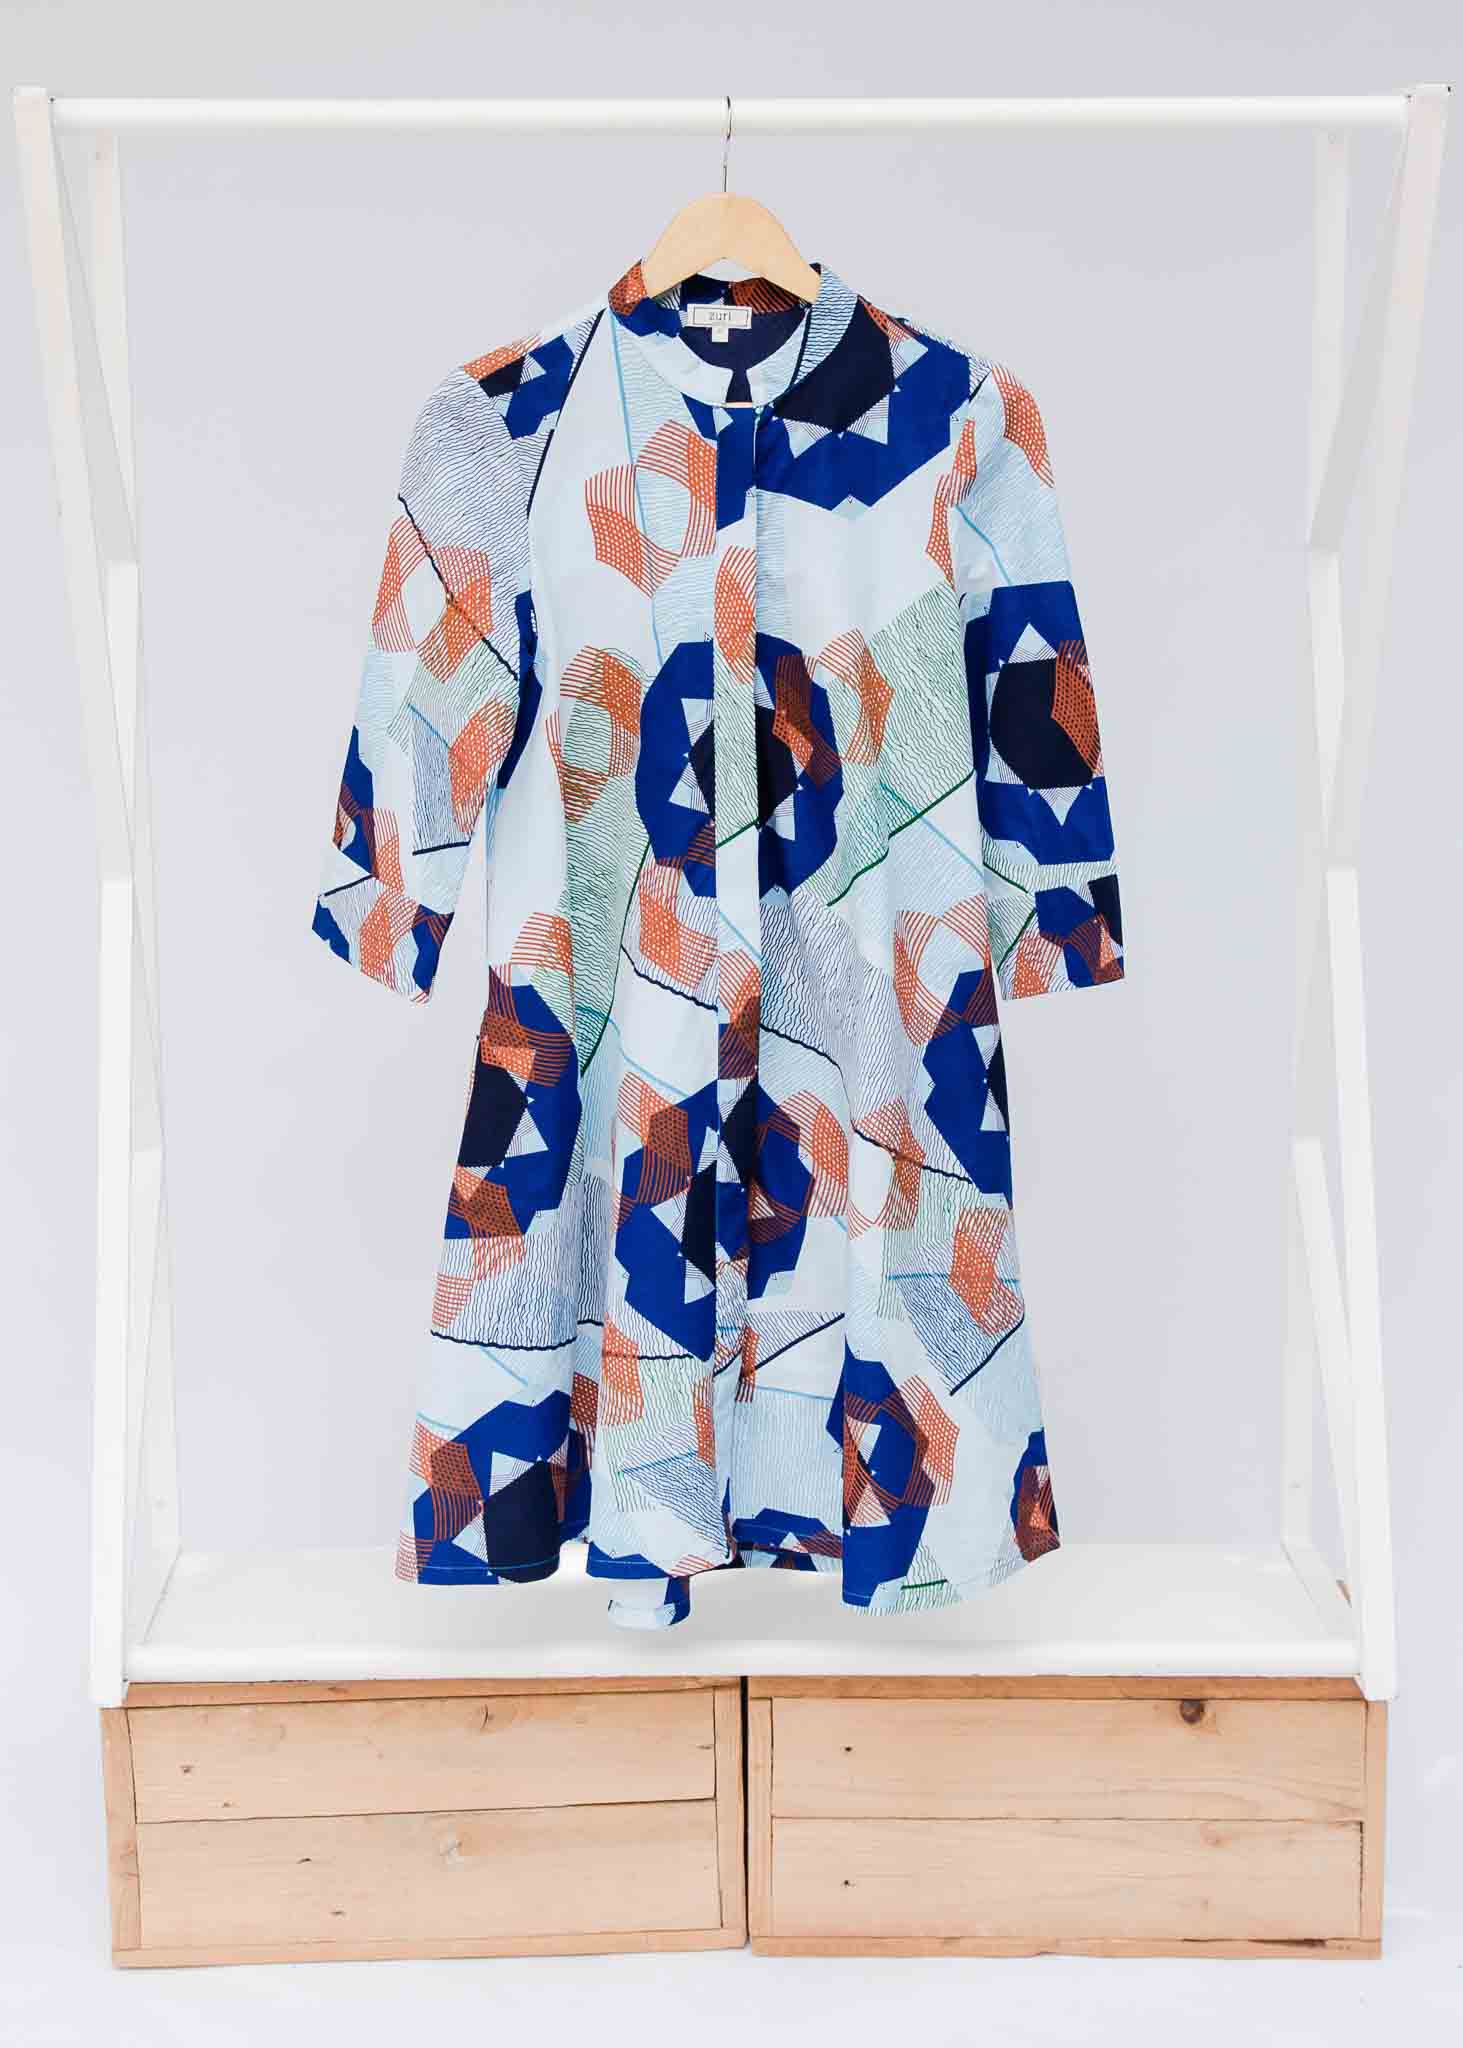 Display of dress with blue, green and orange abstract circular design pattern.